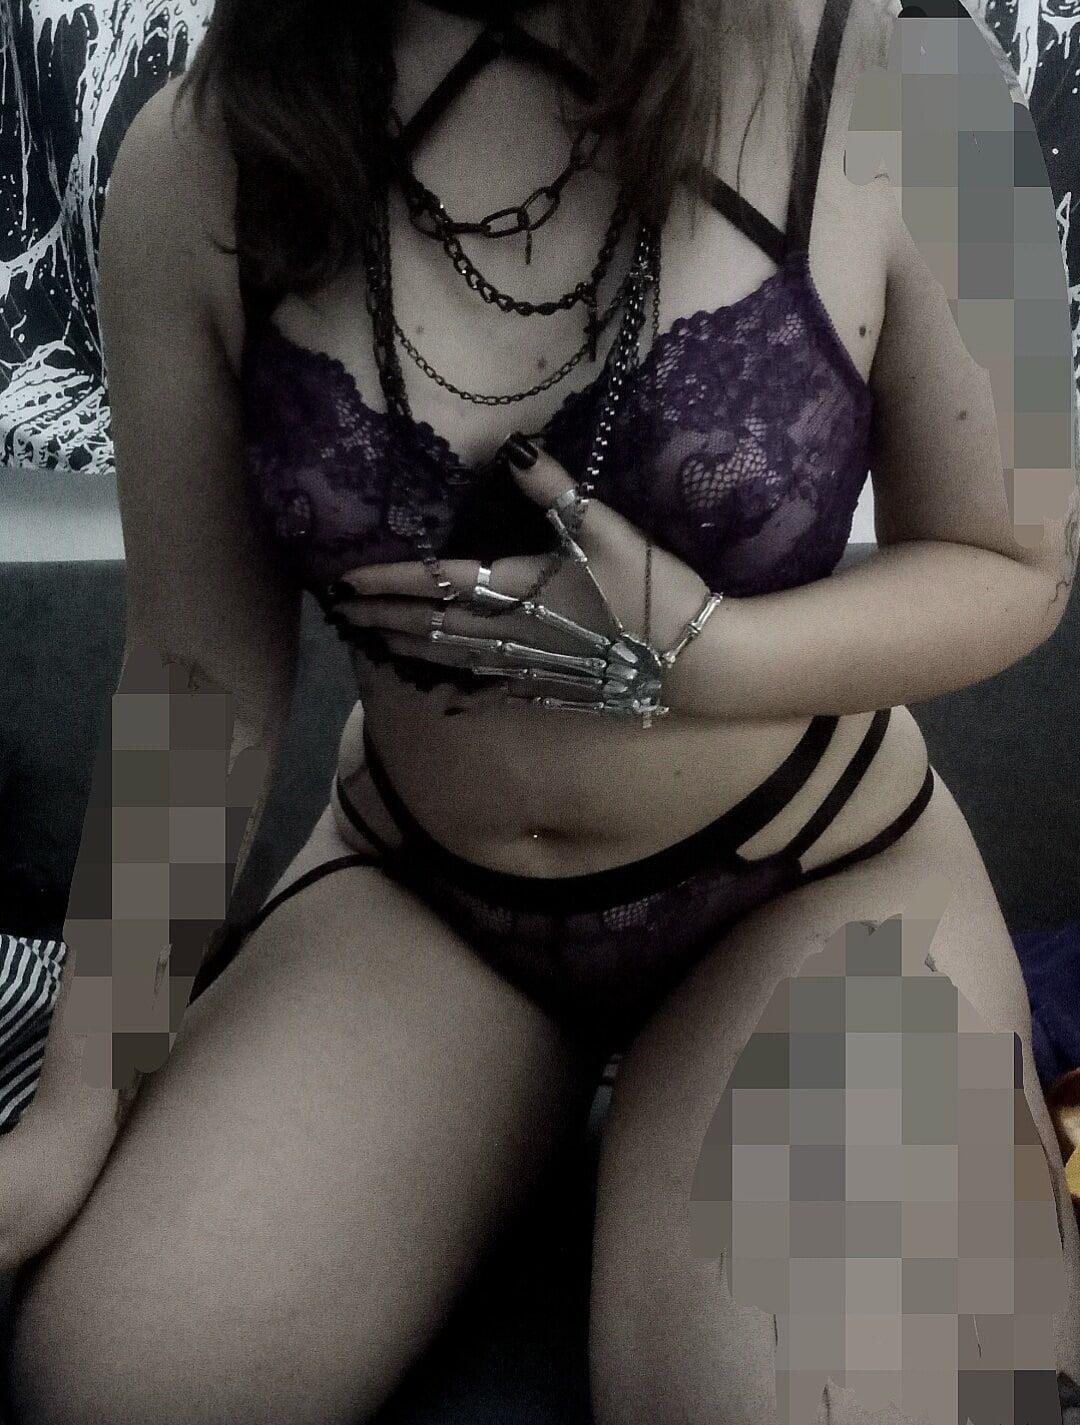 Young girl in slutty purple lingerie  #3